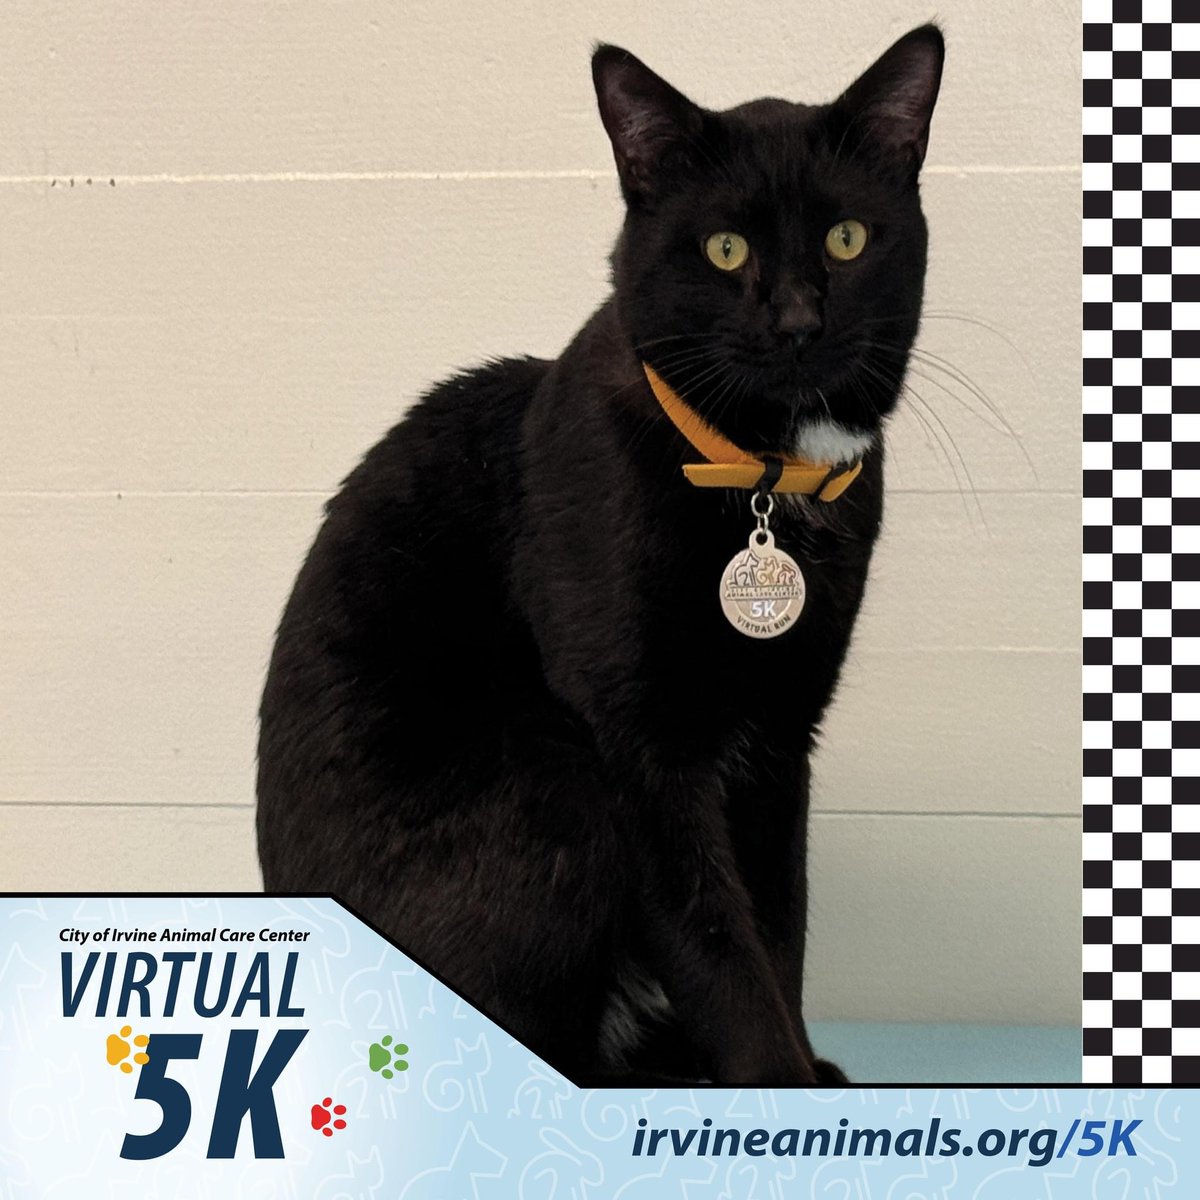 It’s not too late to join @IrvineAnimals’ Virtual 5K! 👟Choose your own pace and complete your 3.1 miles anytime, anywhere in April. Every mile counts toward supporting the center’s vital programs that care for homeless, neglected & abused animals. ℹ️ bit.ly/4b02K8H